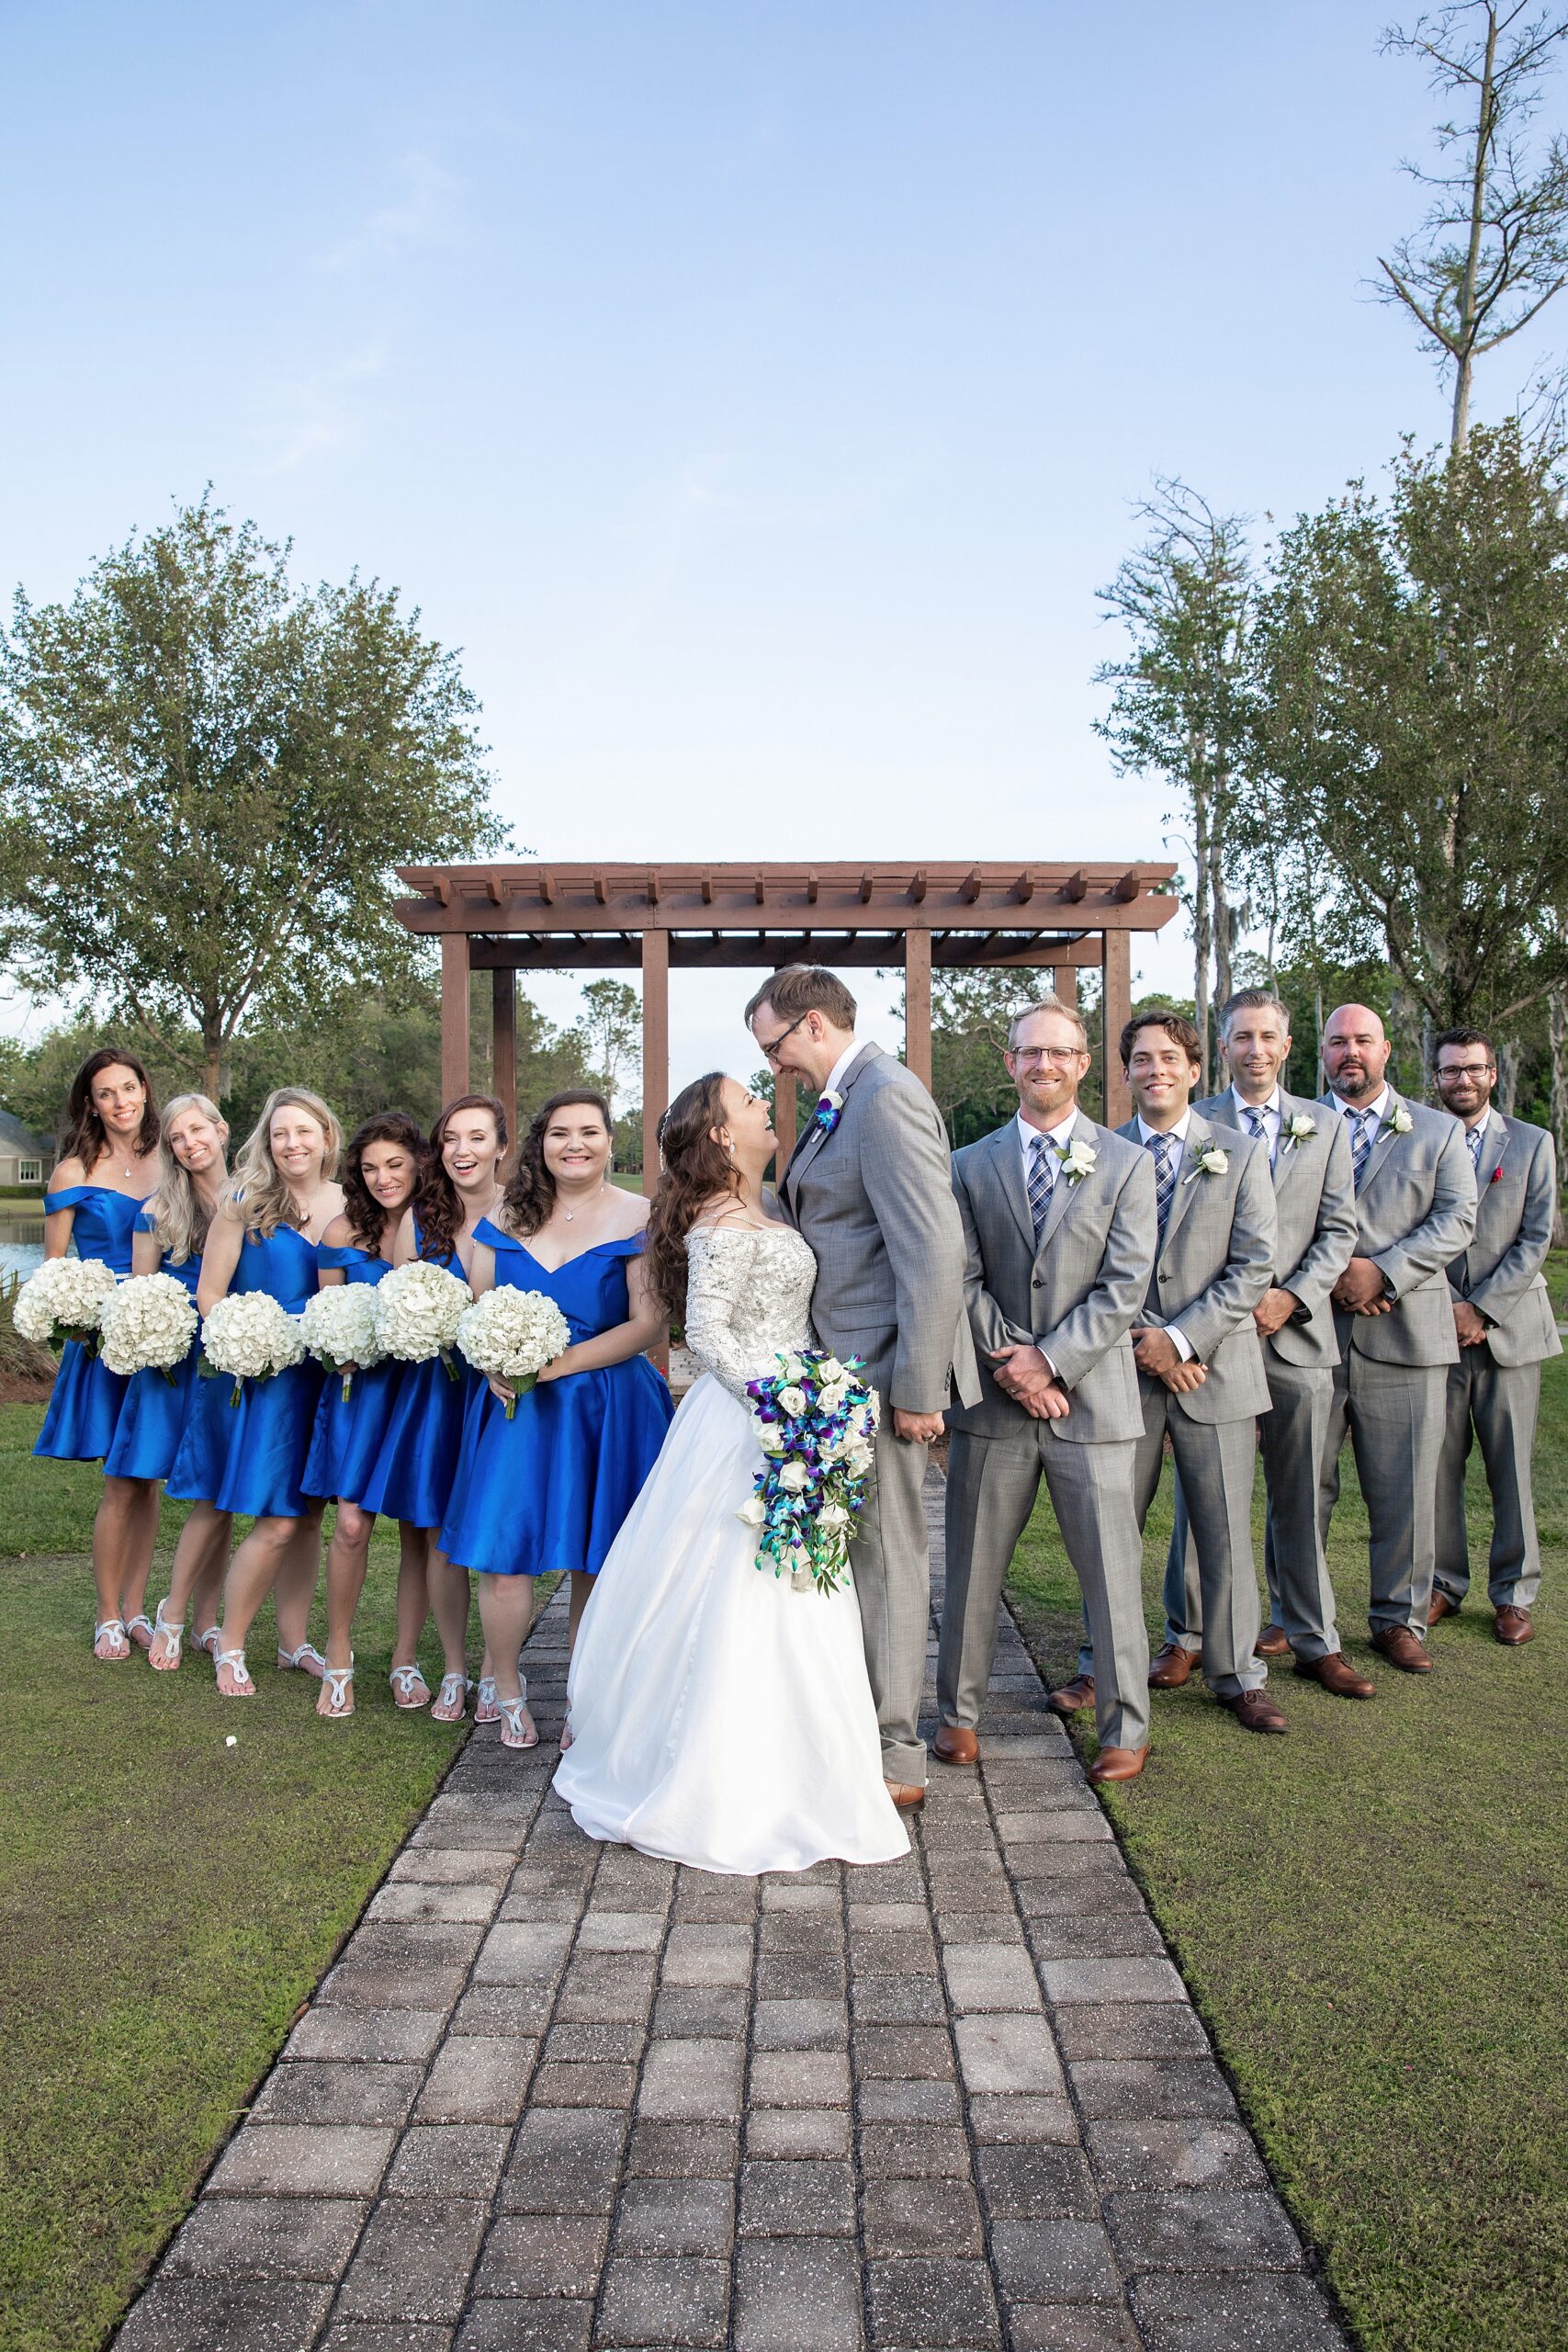 Newlyweds stand nose to nose while their wedding party stands on either side of them in front of a pergola at their deercreek country club wedding